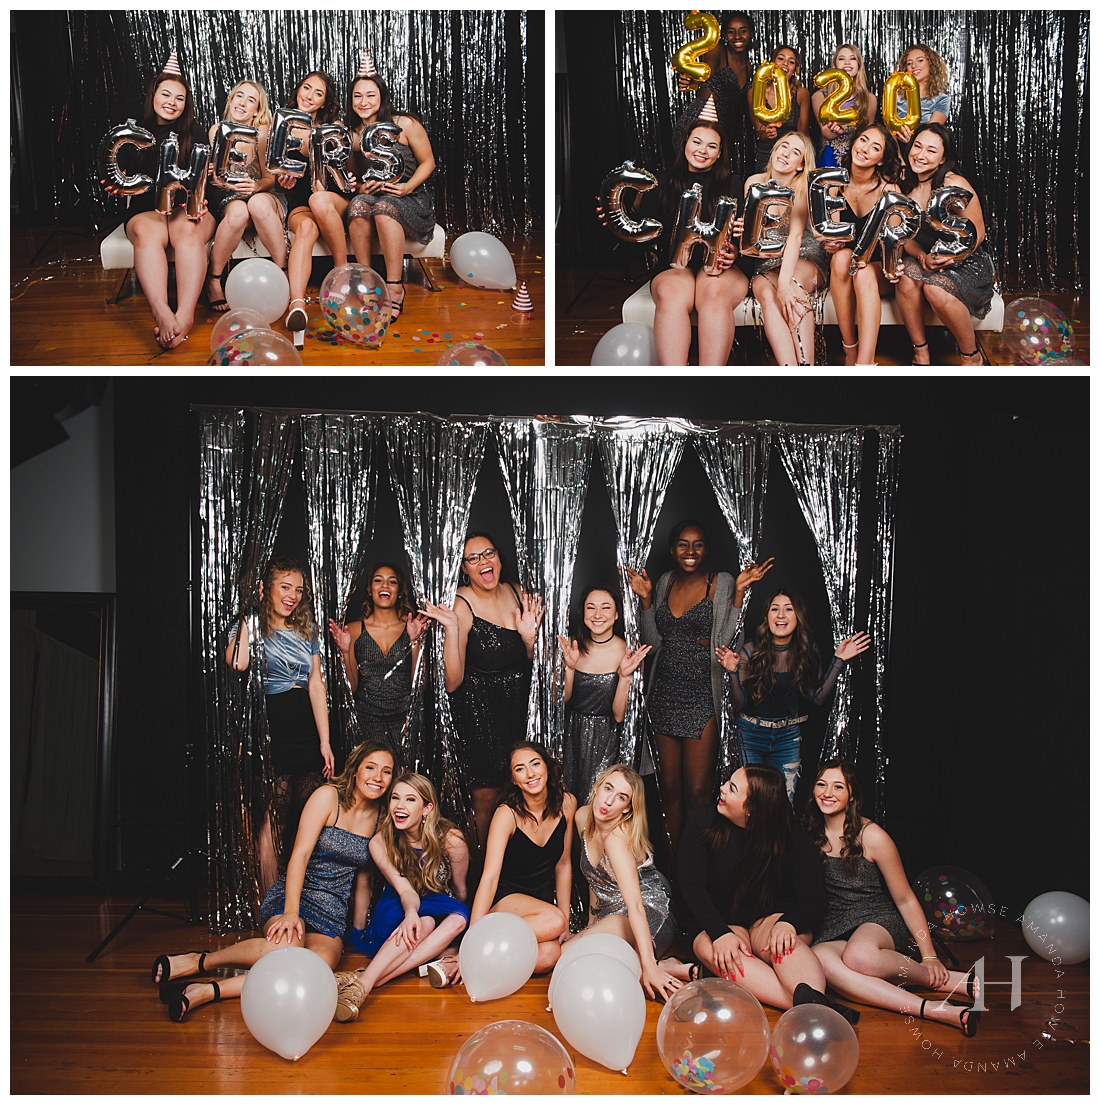 Festive New Year's Eve Themed Photoshoot in Tacoma Studio photographed by Amanda Howse